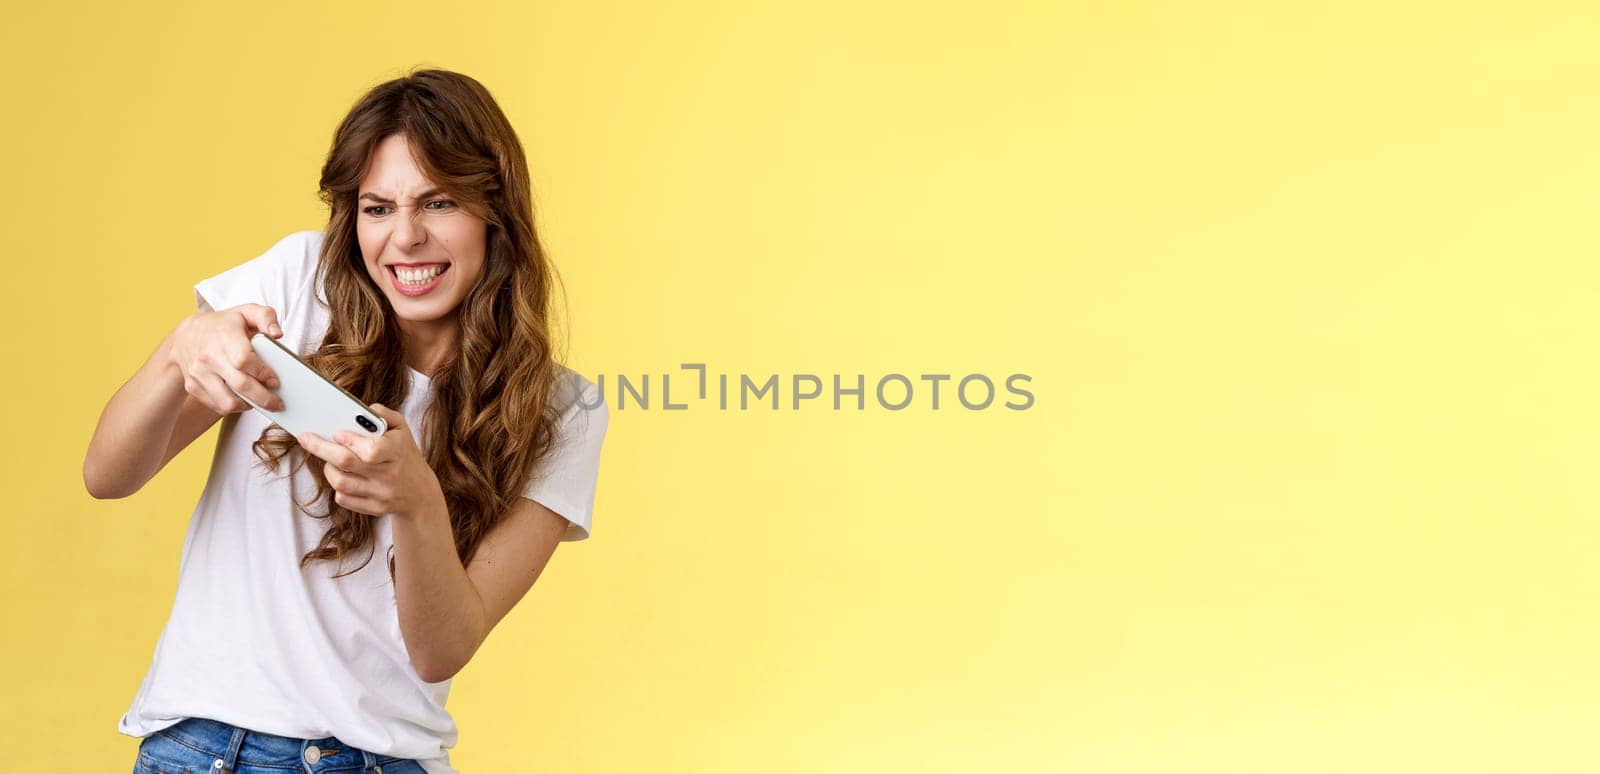 Girl must win race. Excited determined focused eager playful woman hold horizontally smartphone tilt body playing intense game frowning grimacing stare mobile phone screen stand yellow background.